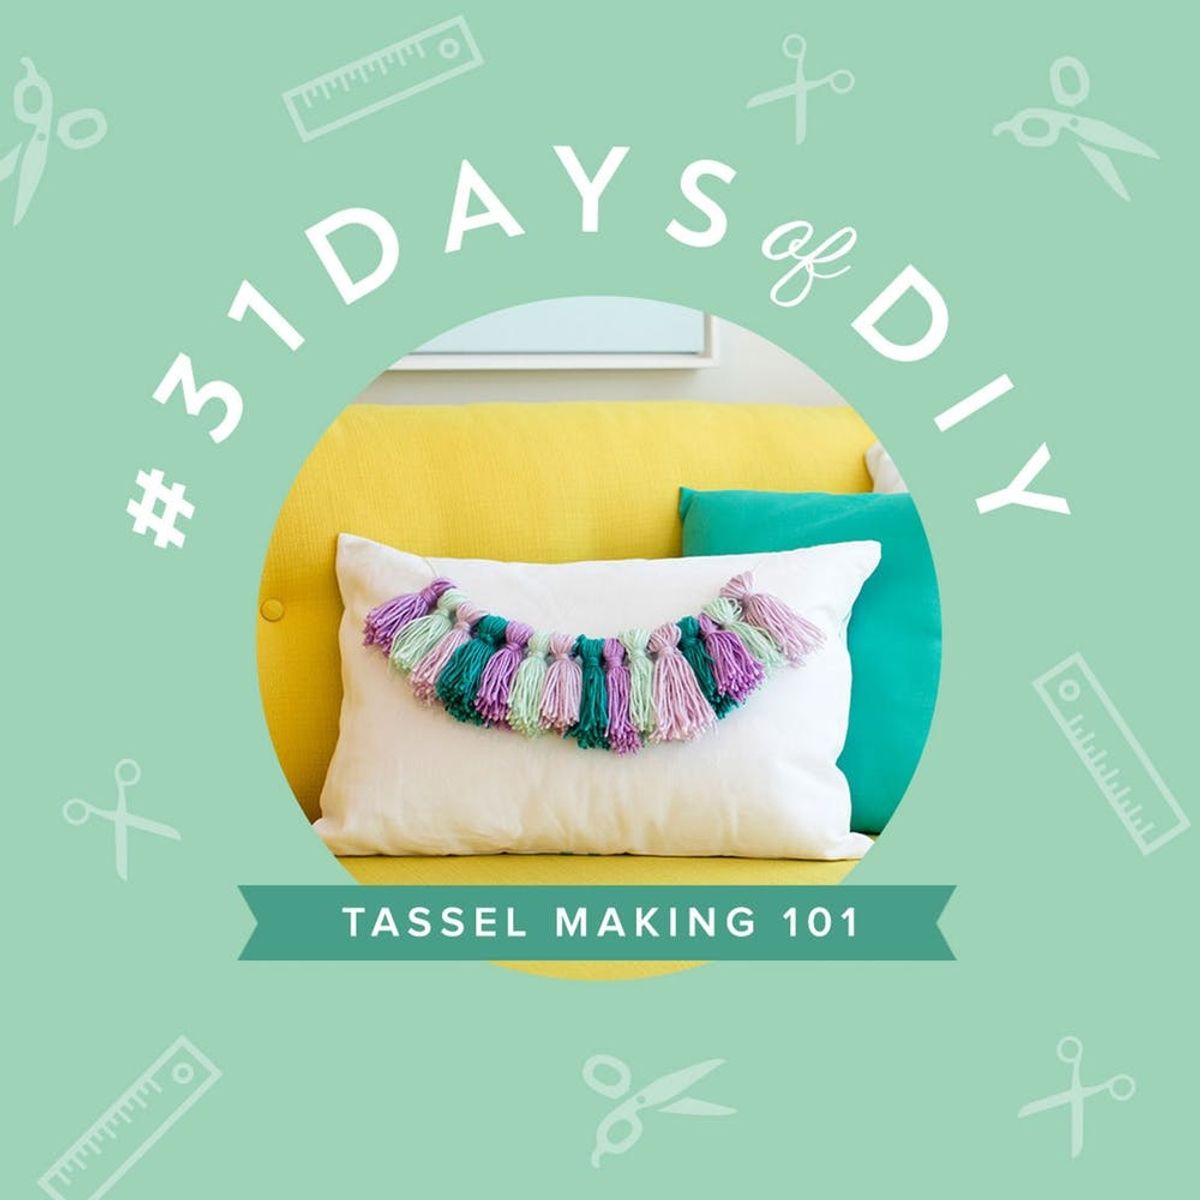 Everything You Need to Know About DIY-ing Tassels